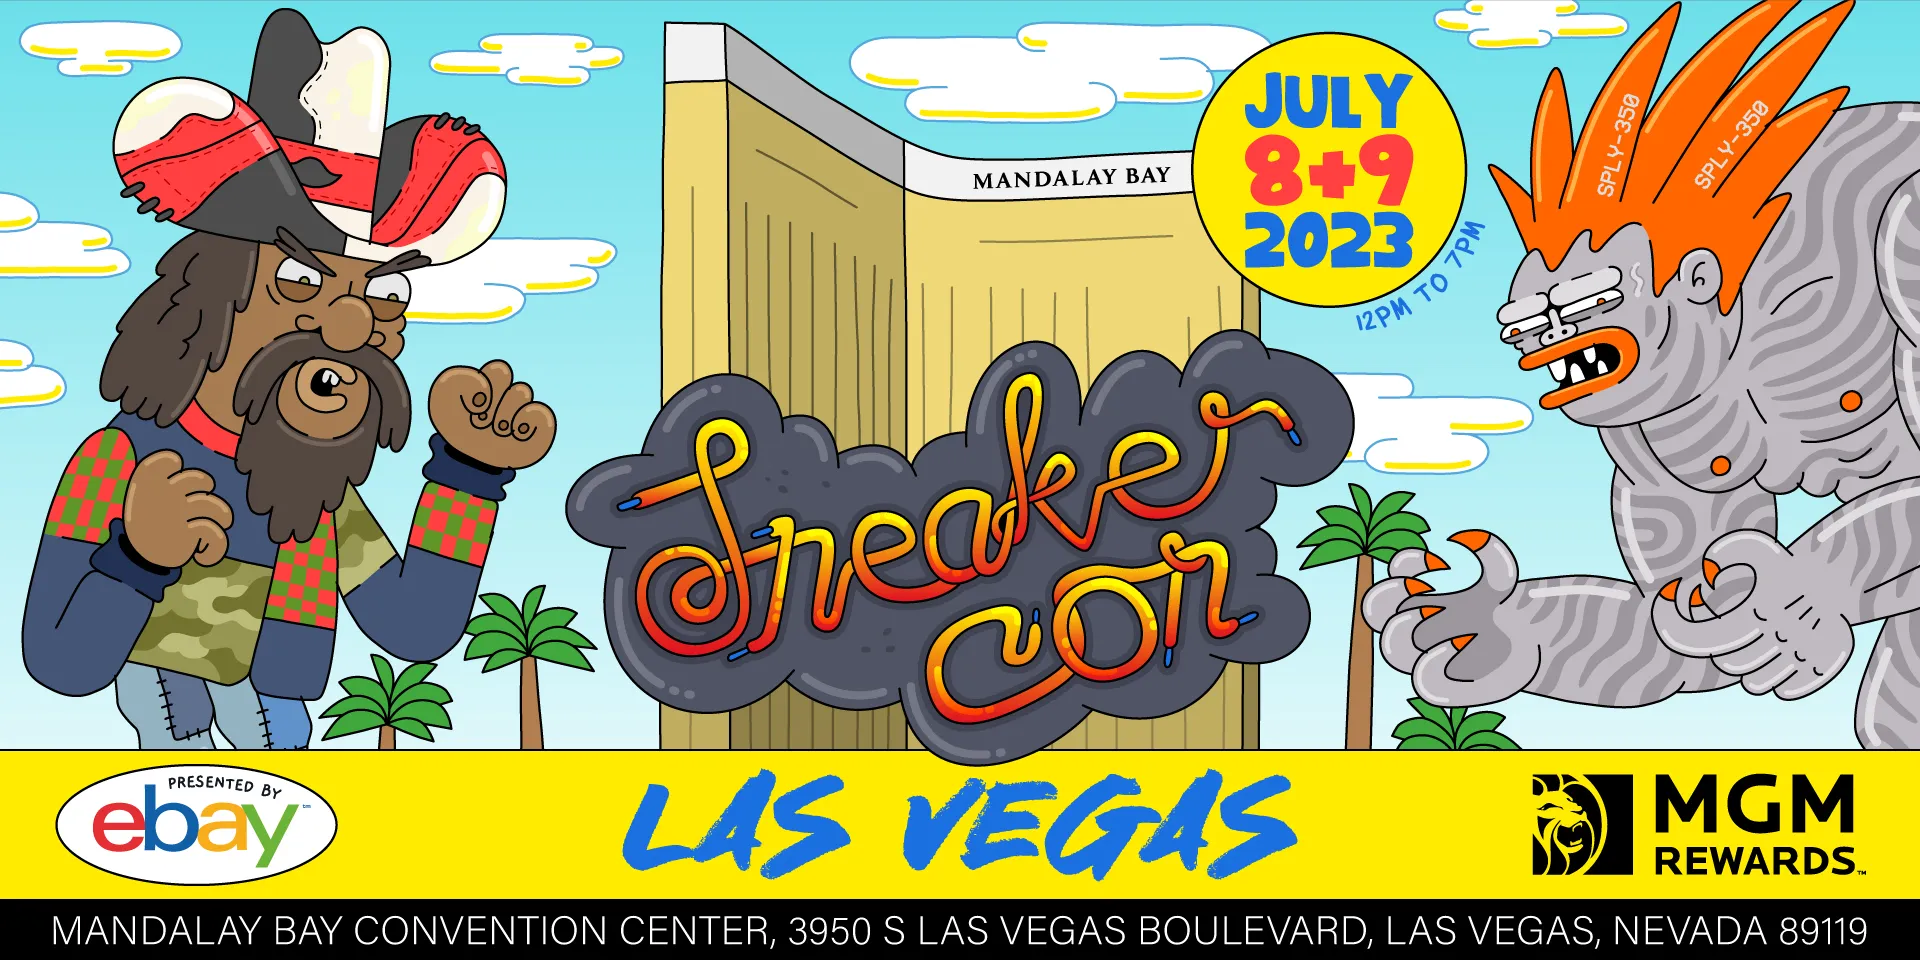 Sneaker Con Las Vegas 2023: The Ultimate Gathering for Sneaker Enthusiasts